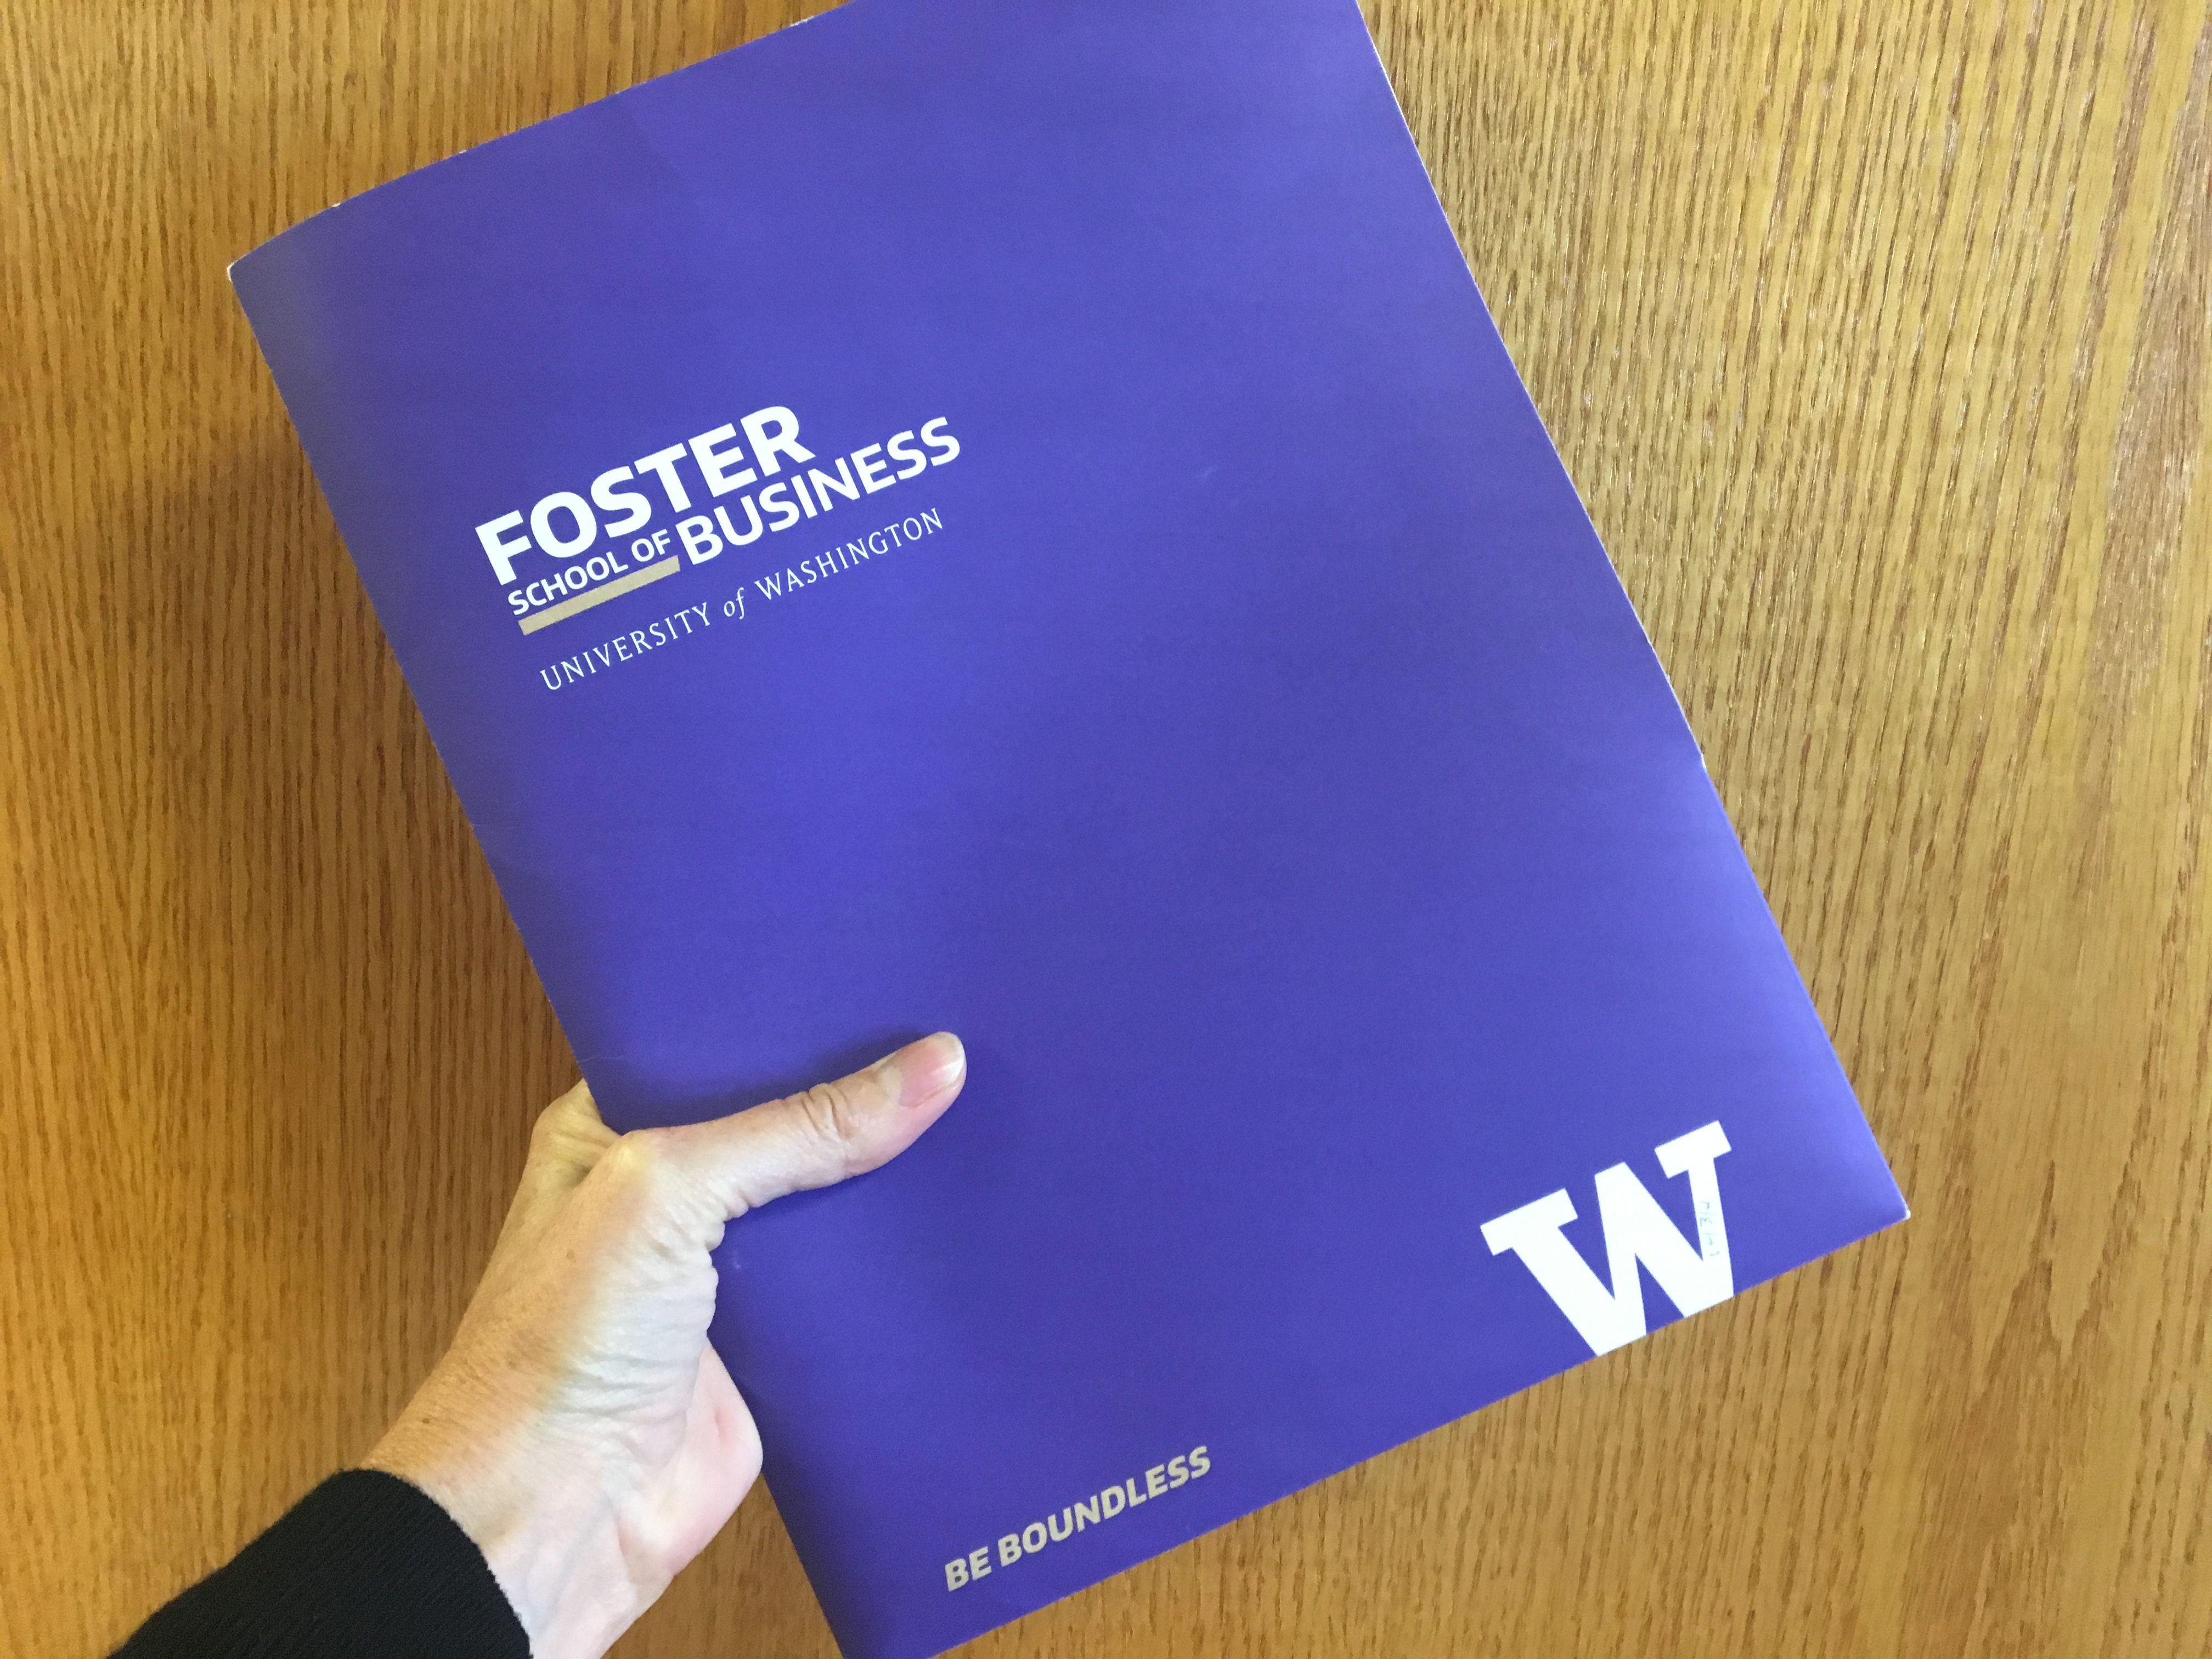 The University of Washington, Foster School of Business is offering a free six-week Business Certificate Program in Pasco.